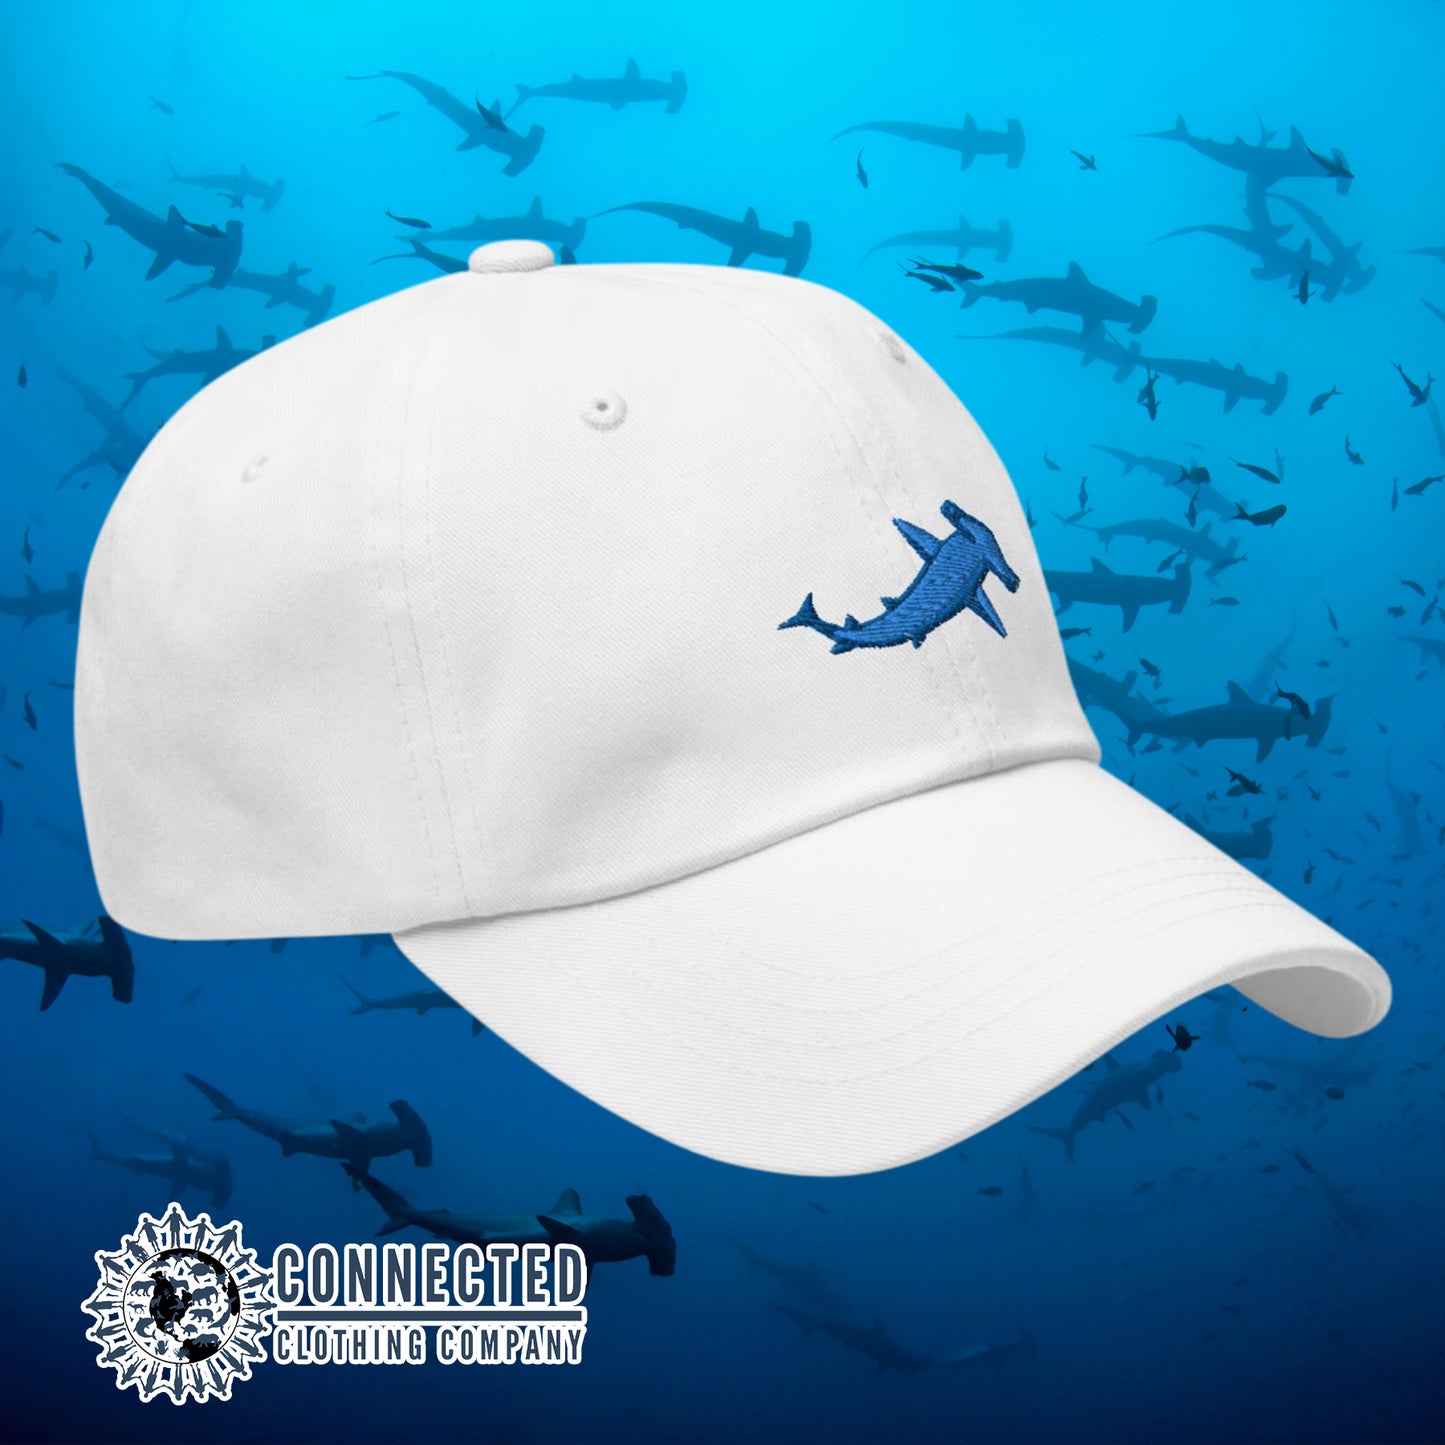 White Hammerhead Shark Cotton Cap - sweetsherriloudesigns - Ethical & Sustainable Clothing That Gives Back - 10% donated to Oceana shark conservation